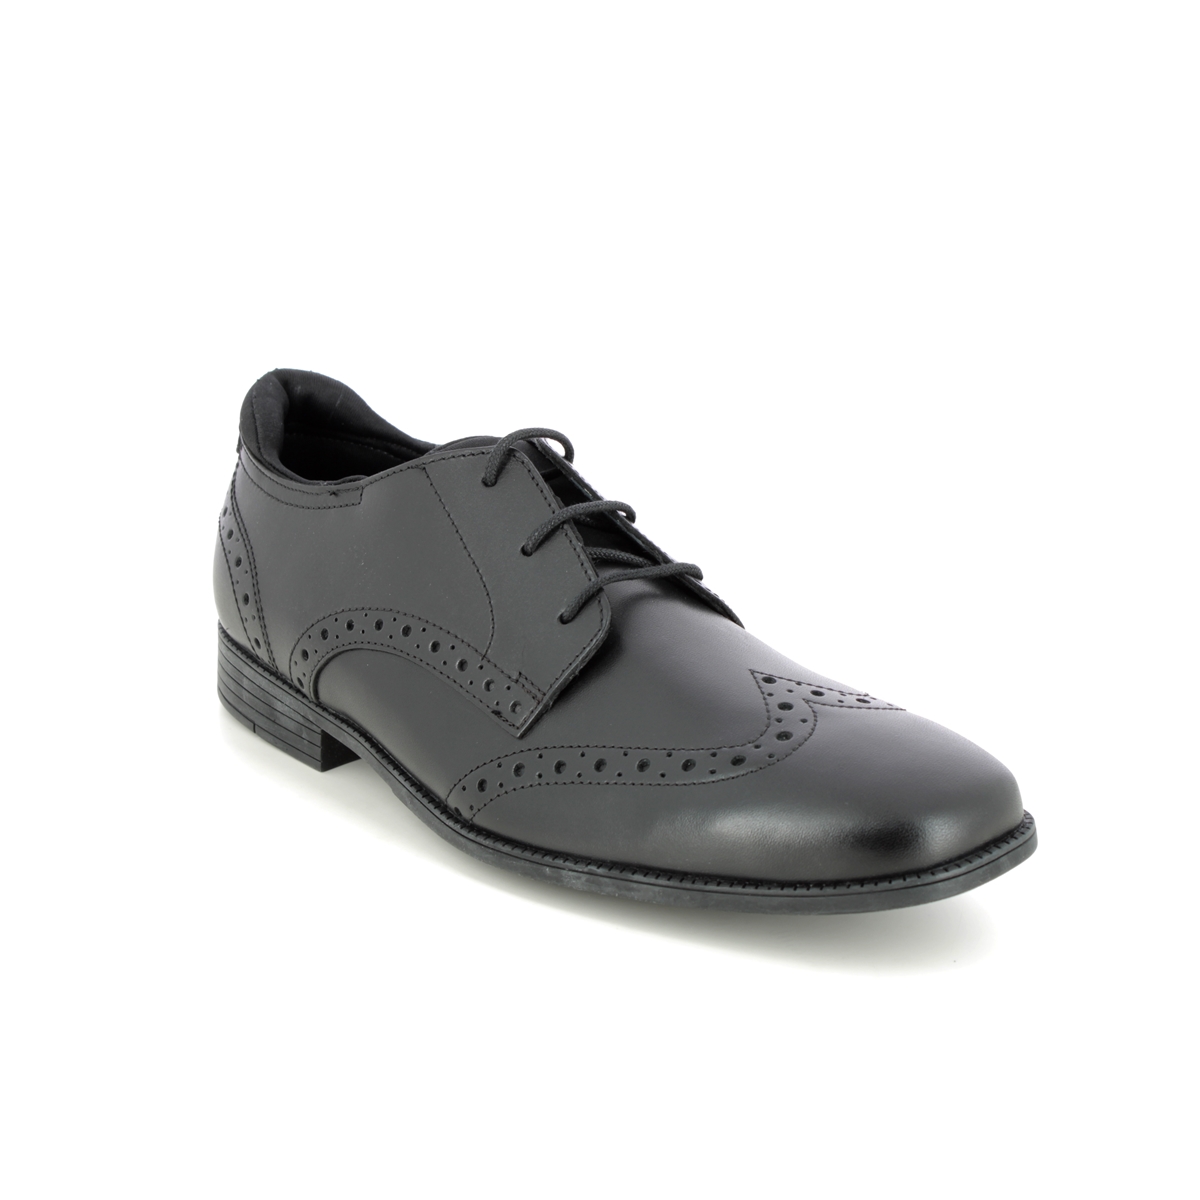 Start Rite - Tailor In Black Leather 2792-76F In Size 4.5 In Plain Black Leather For School Boys Shoes  In Black Leather For kids